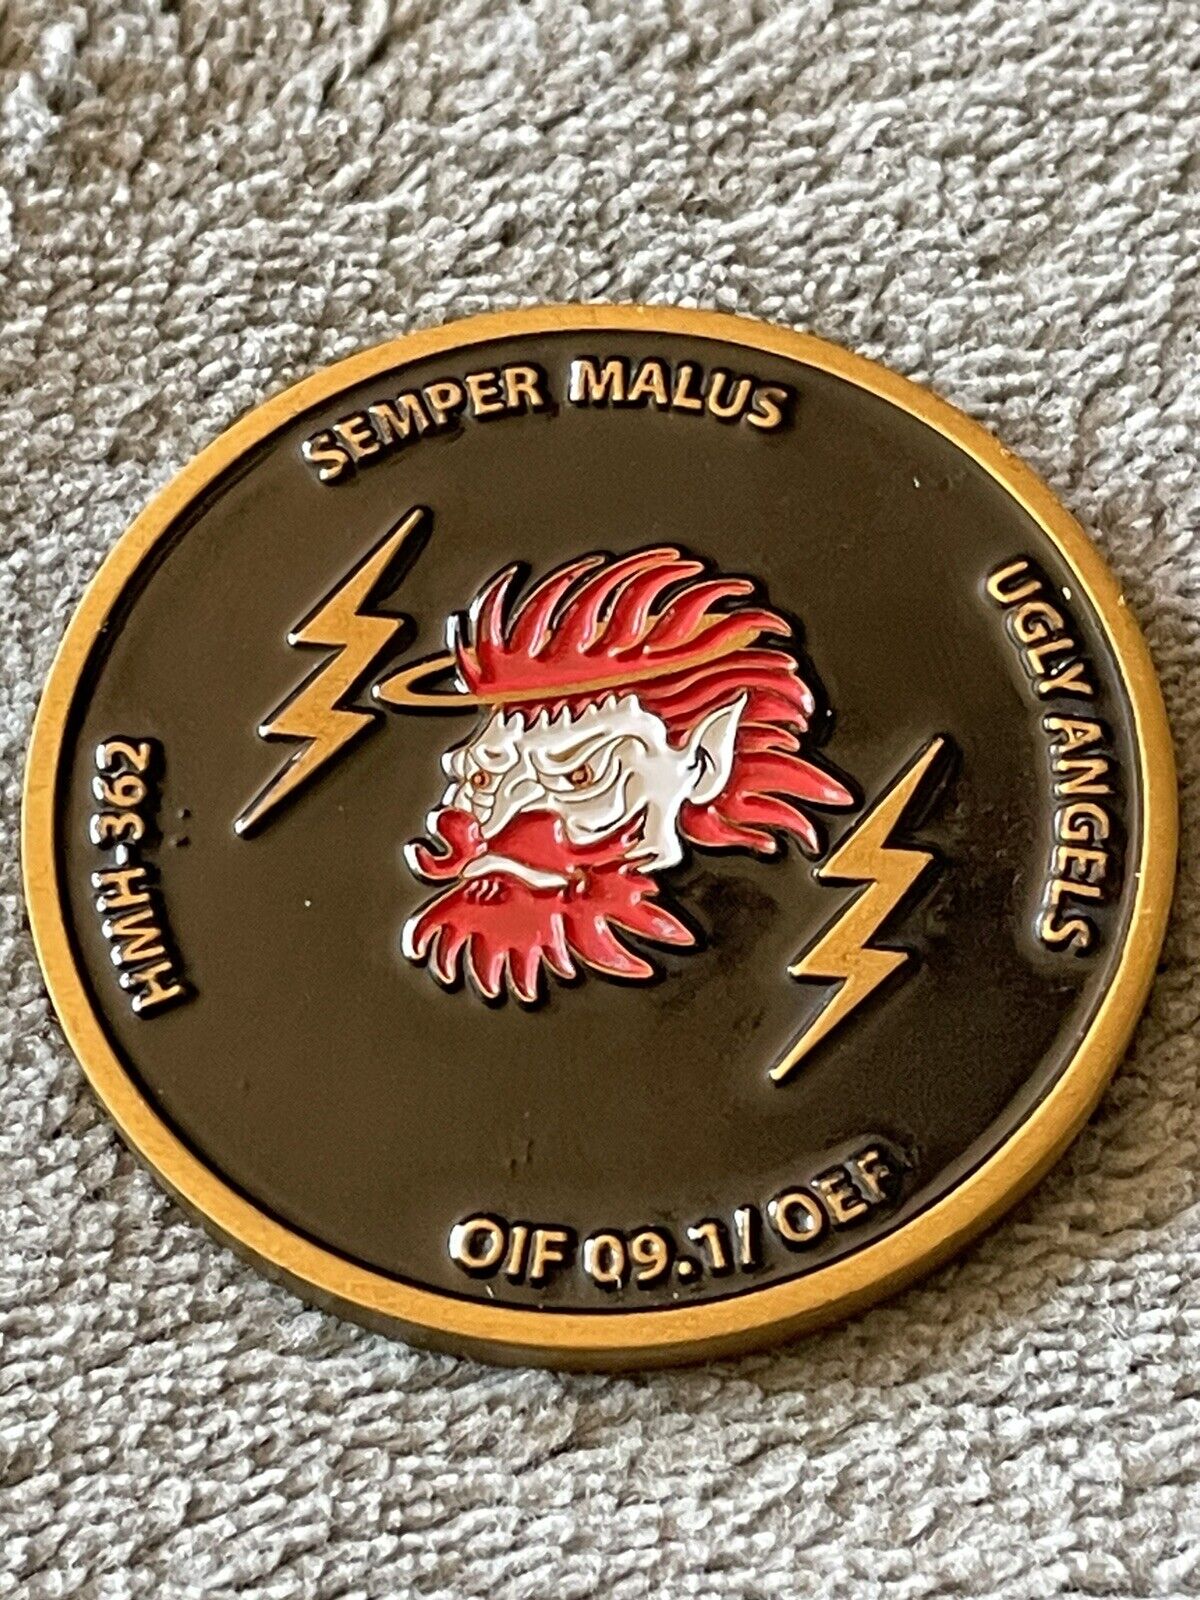 USMC Ugly Angels Challenge Coin HMH-362 Semper Malus OIF 09.1 OEF